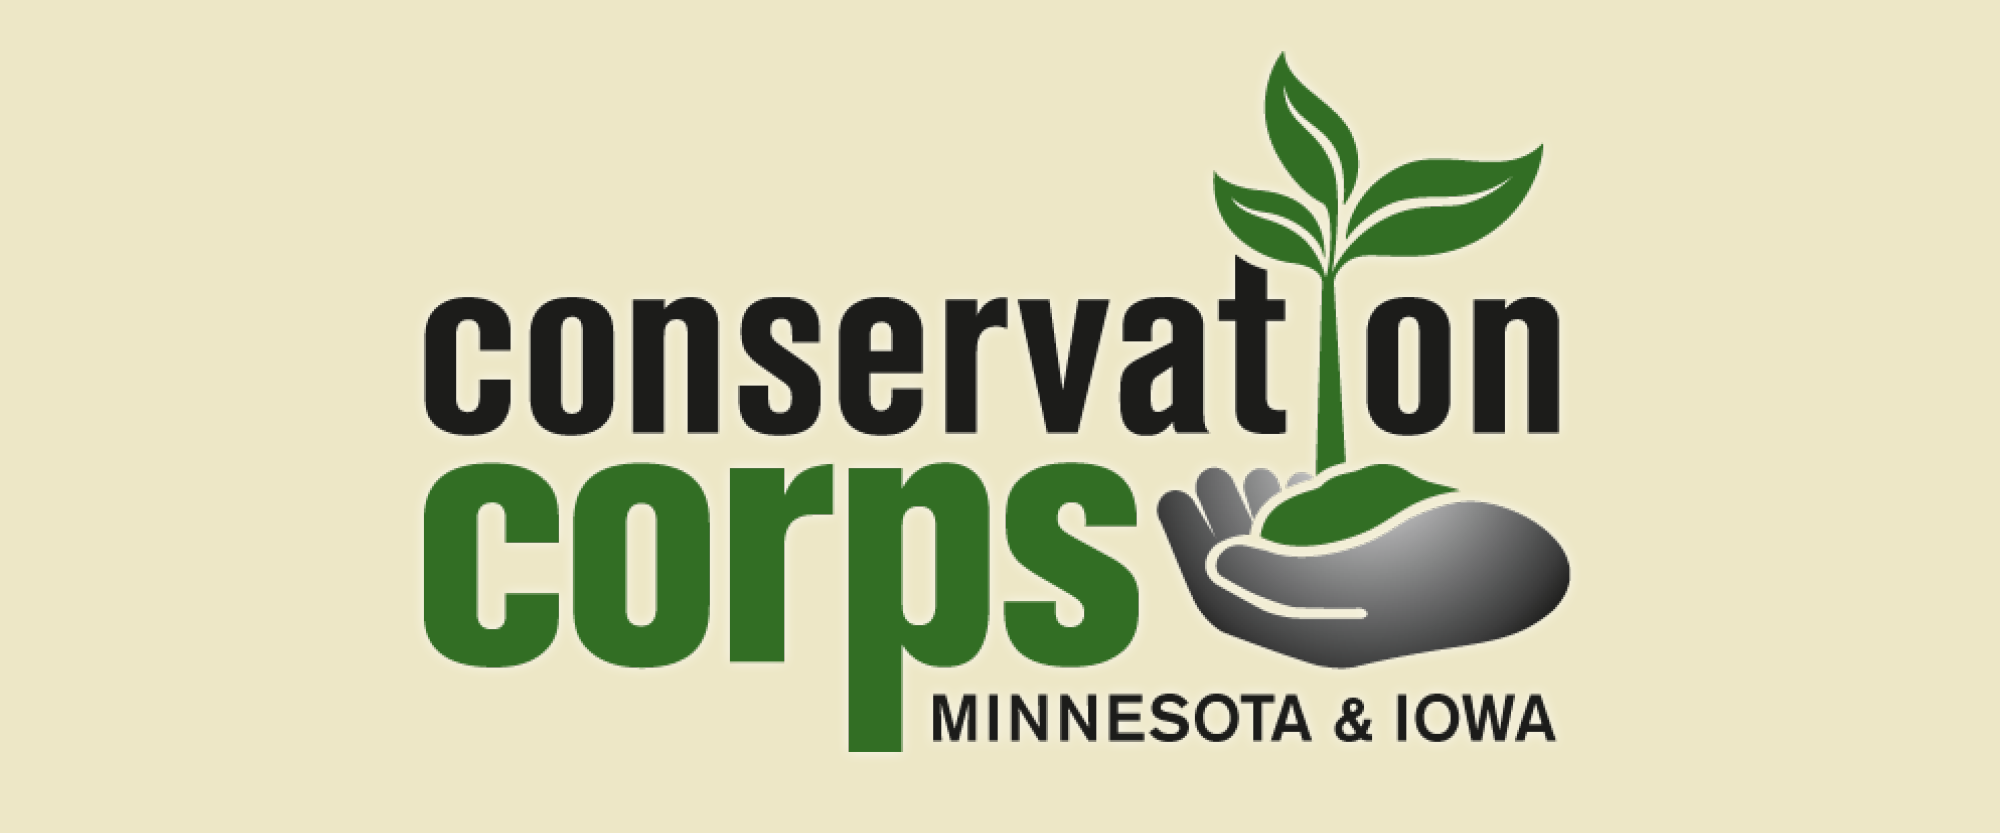 Conservation Corps's Image